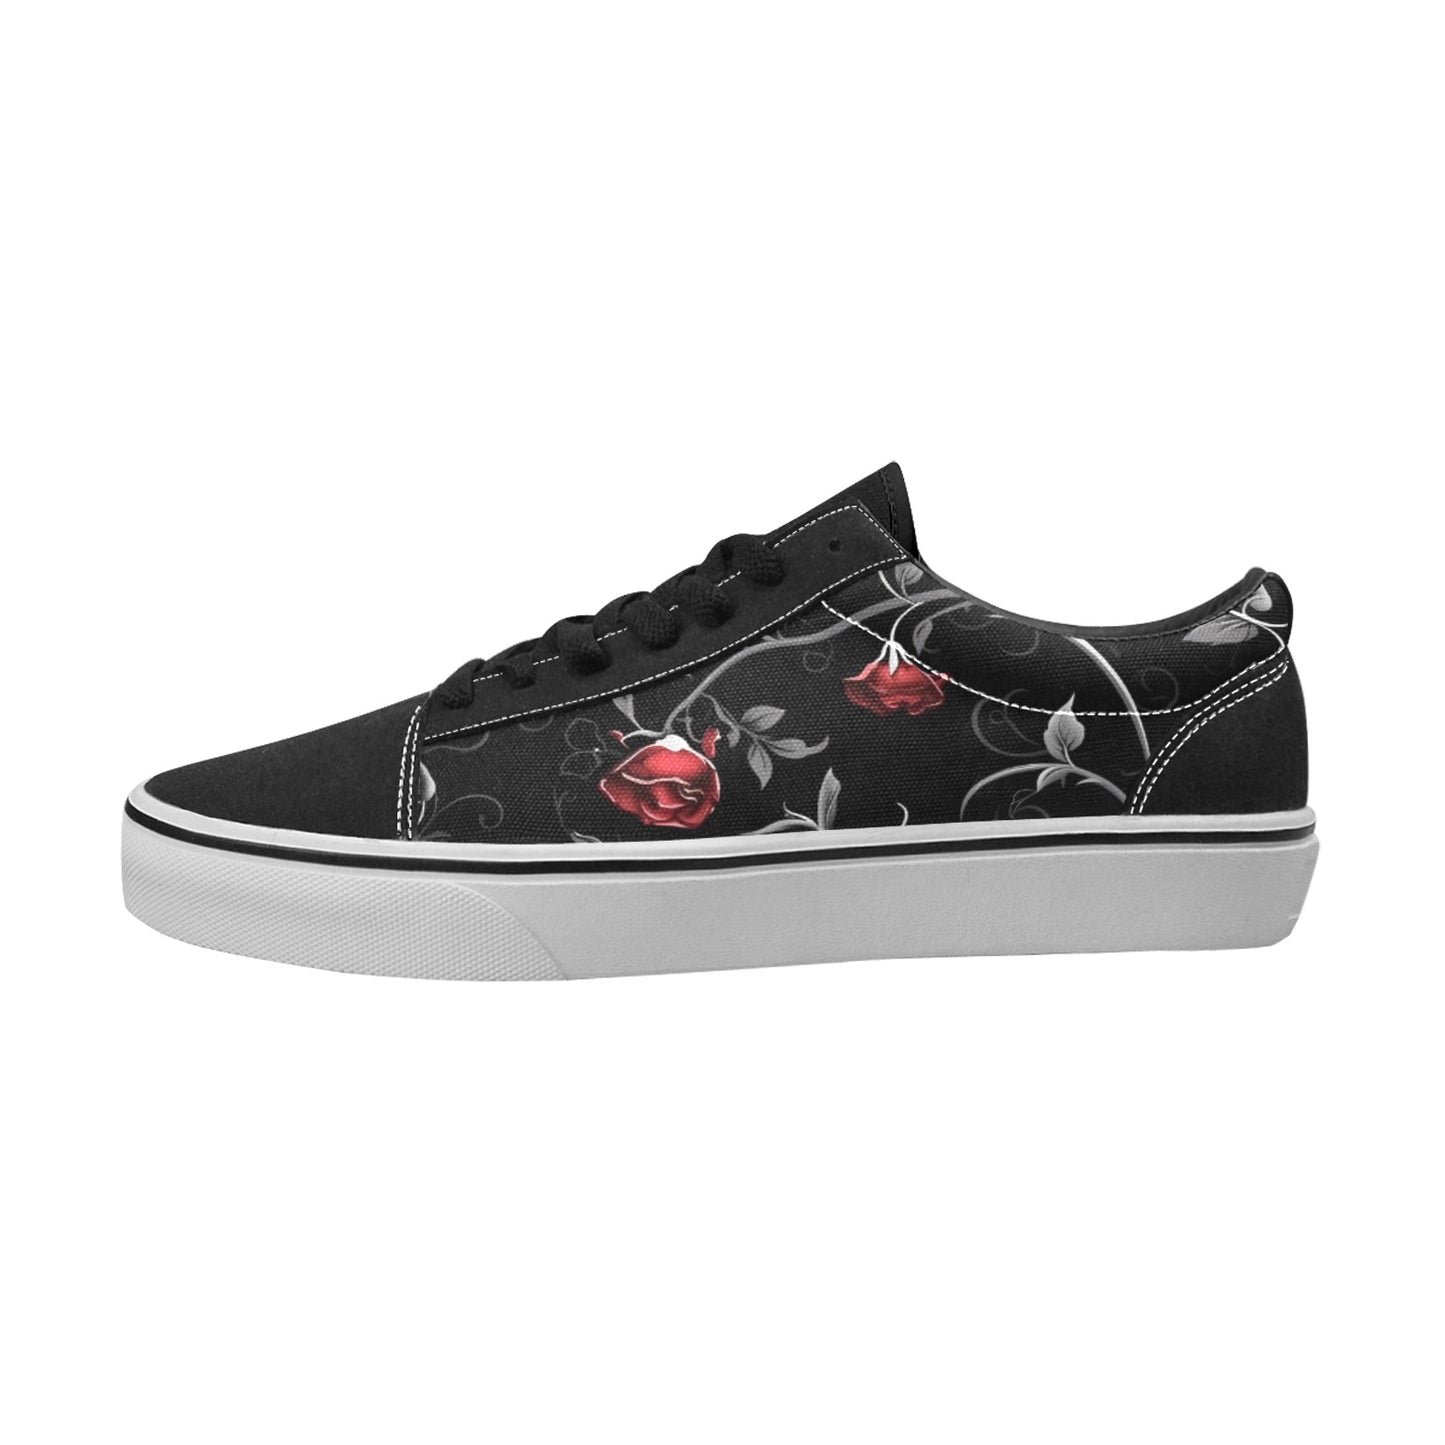 Red Roses And Vines Lace-Up Canvas Shoes